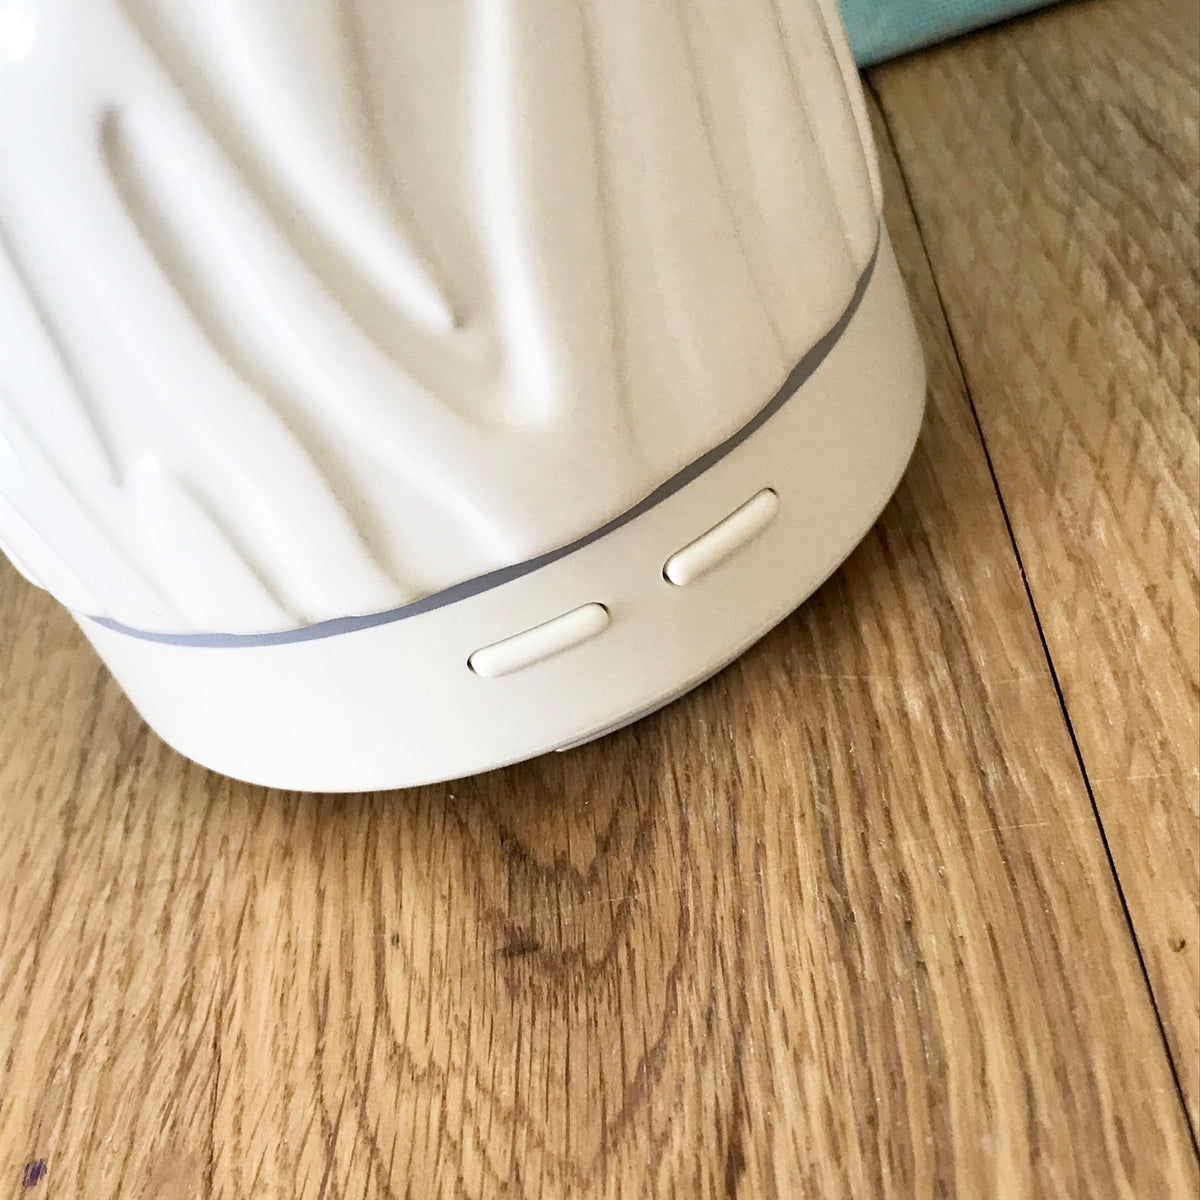 This electric ceramic essential oil diffuser has 2 button controls on the base to control the color changing light feature, turn the unit on/off, and change between continuous and intermittent diffusion.